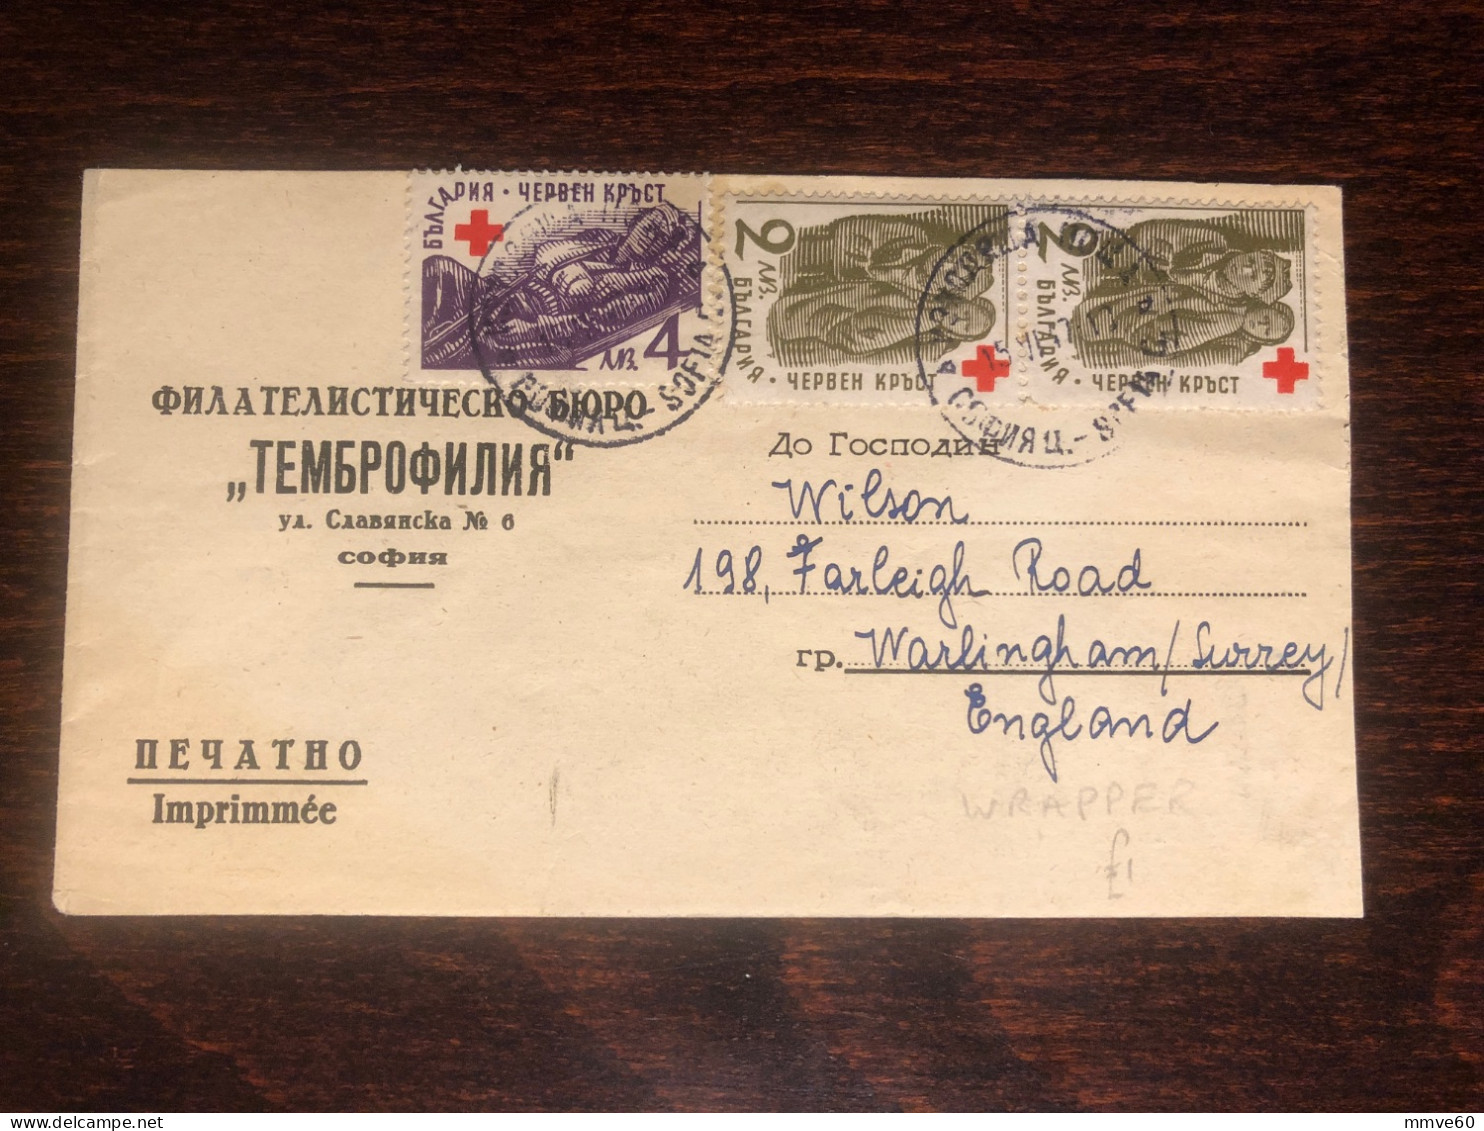 BULGARIA TRAVELLED COVER 1947 YEAR RED CROSS HEALTH MEDICINE - Storia Postale